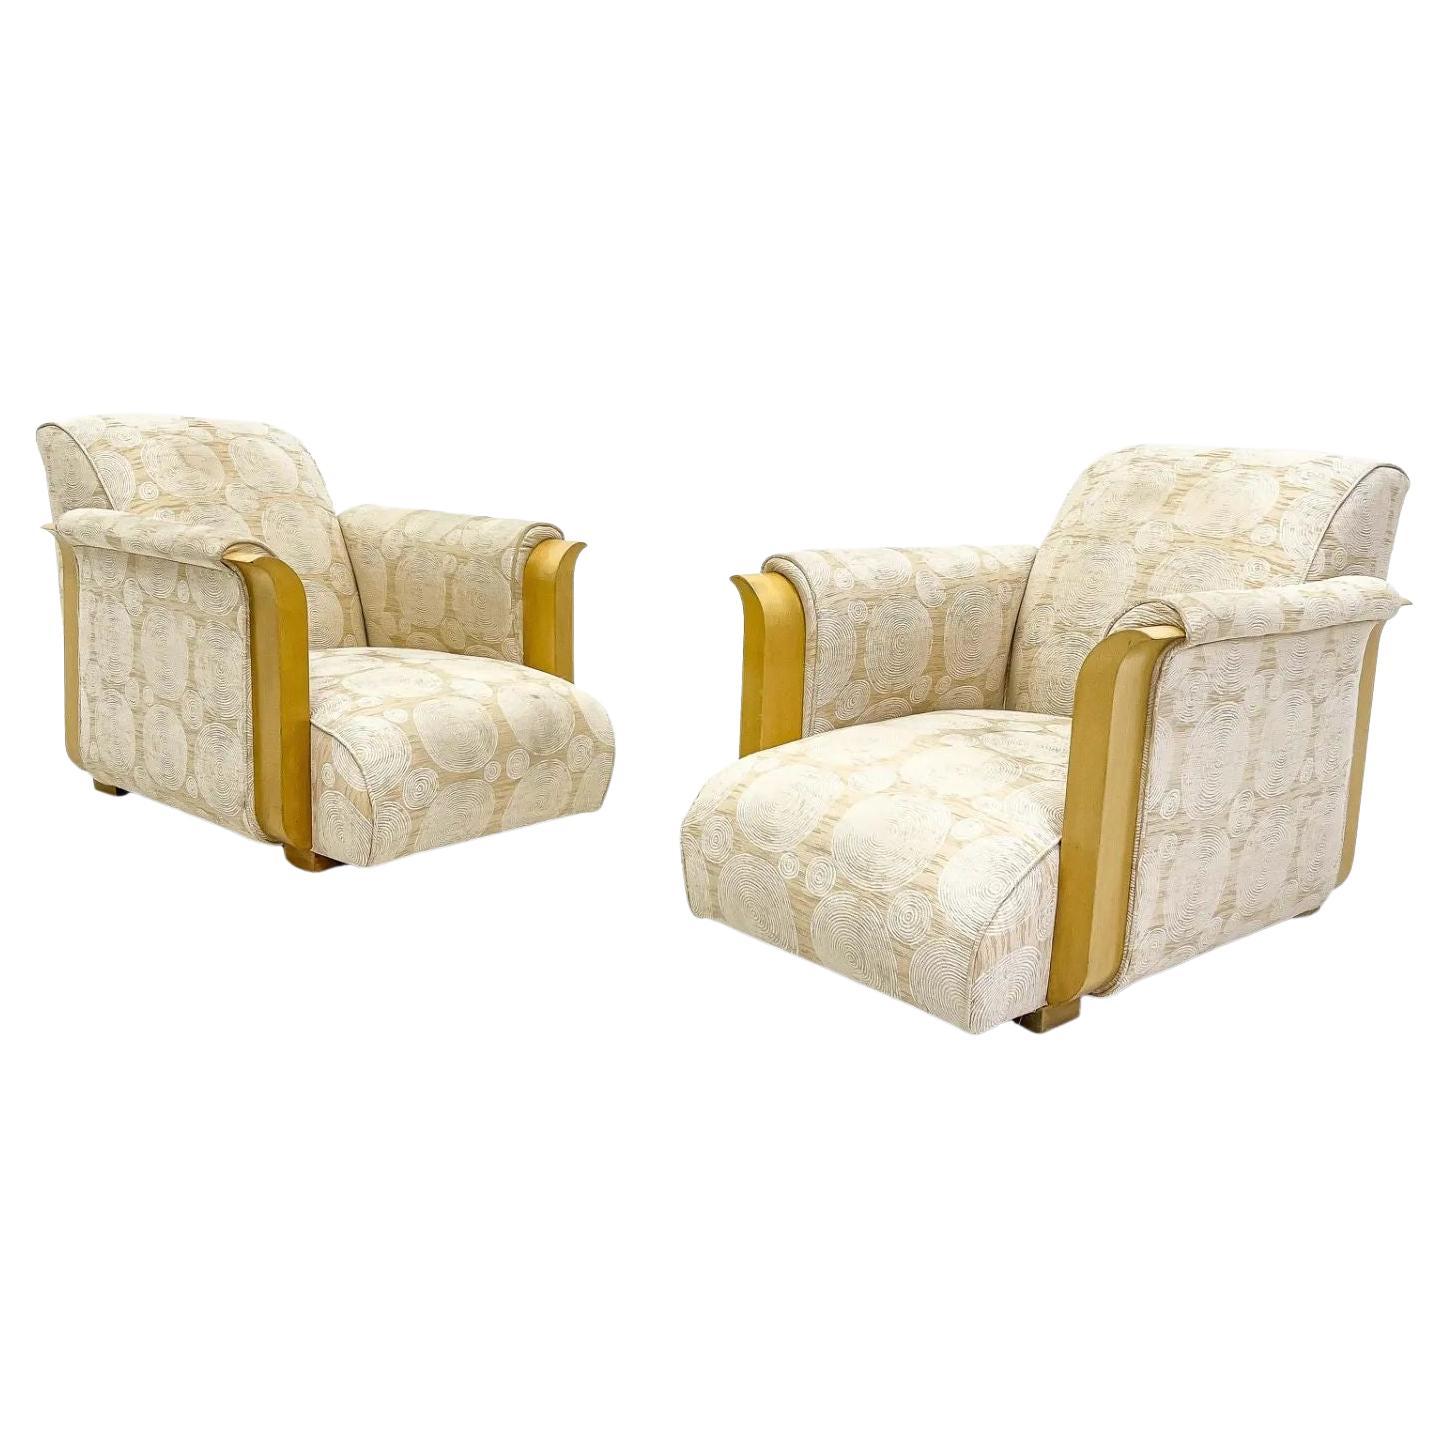 Rare Pair of French Art Deco Lounge Chairs by Michel Dufet, France, 1930s